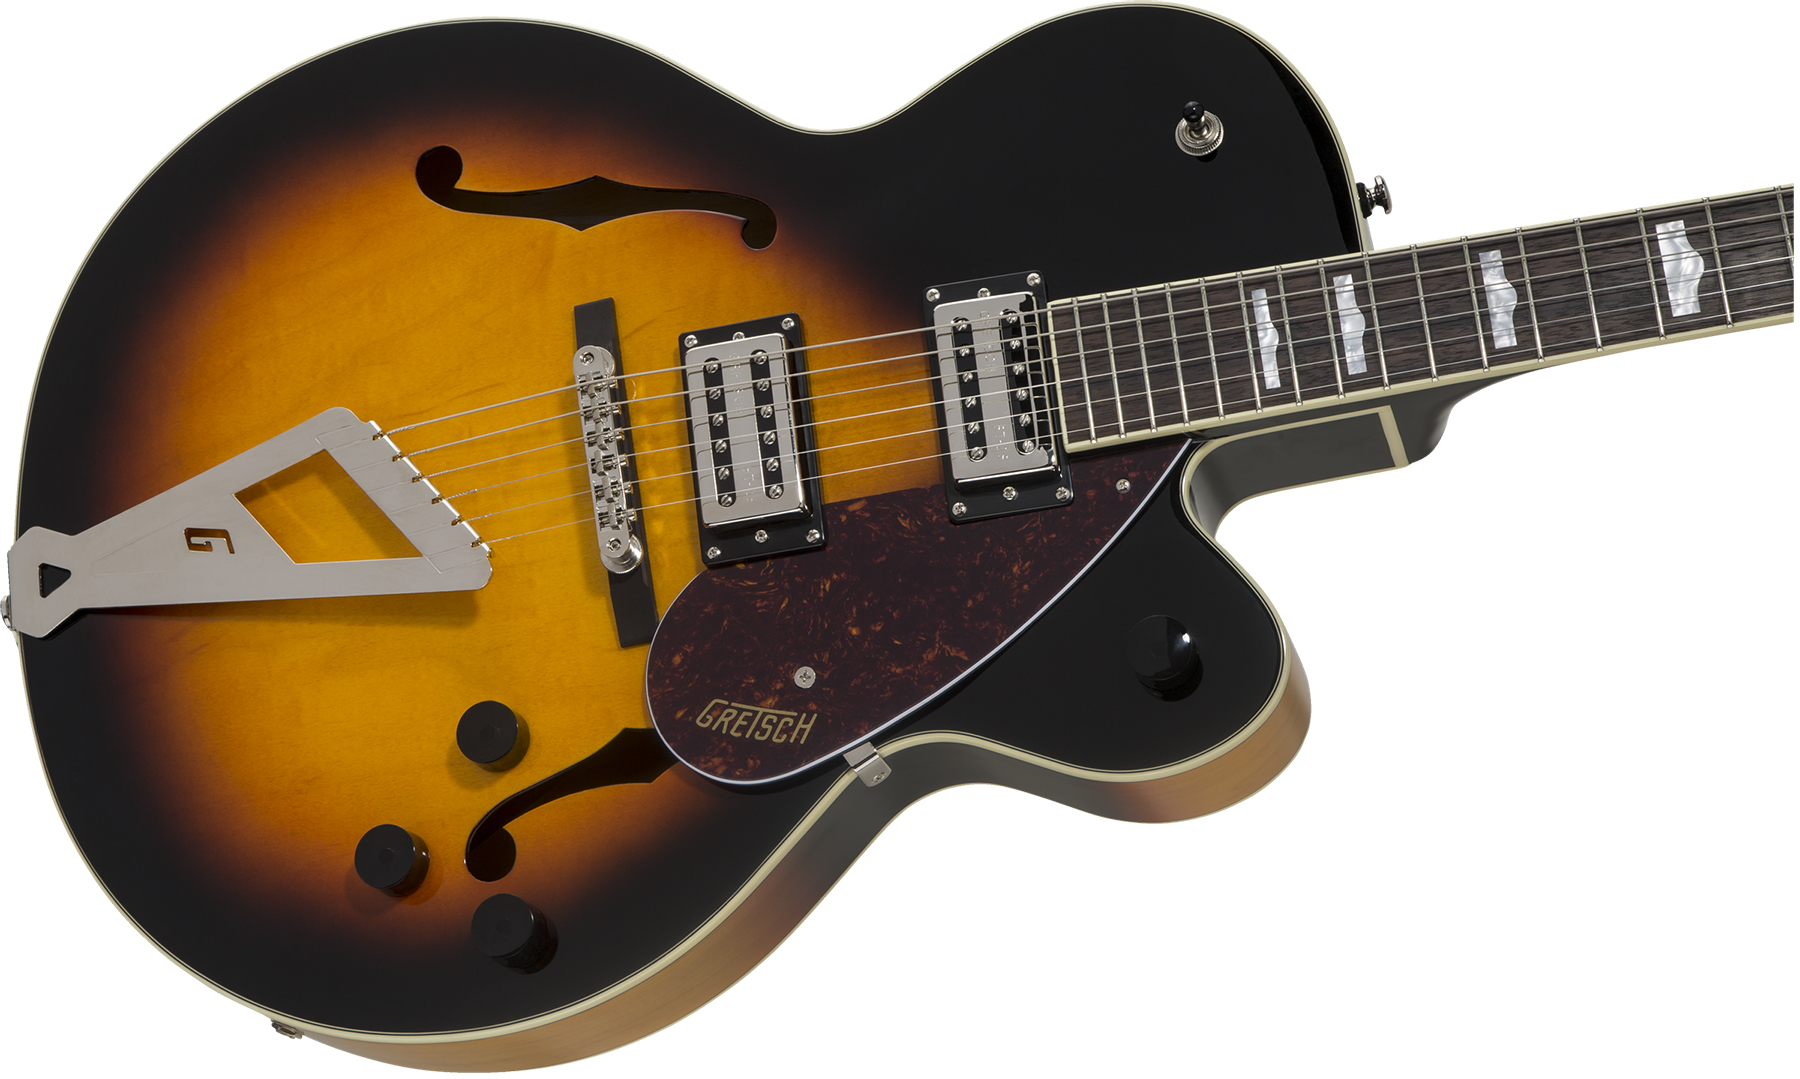 Gretsch G2420 Streamliner Hollow Body With Chromatic Ii 2h Ht Lau - Aged Brooklyn Burst - Guitare Électrique 1/2 Caisse - Variation 2